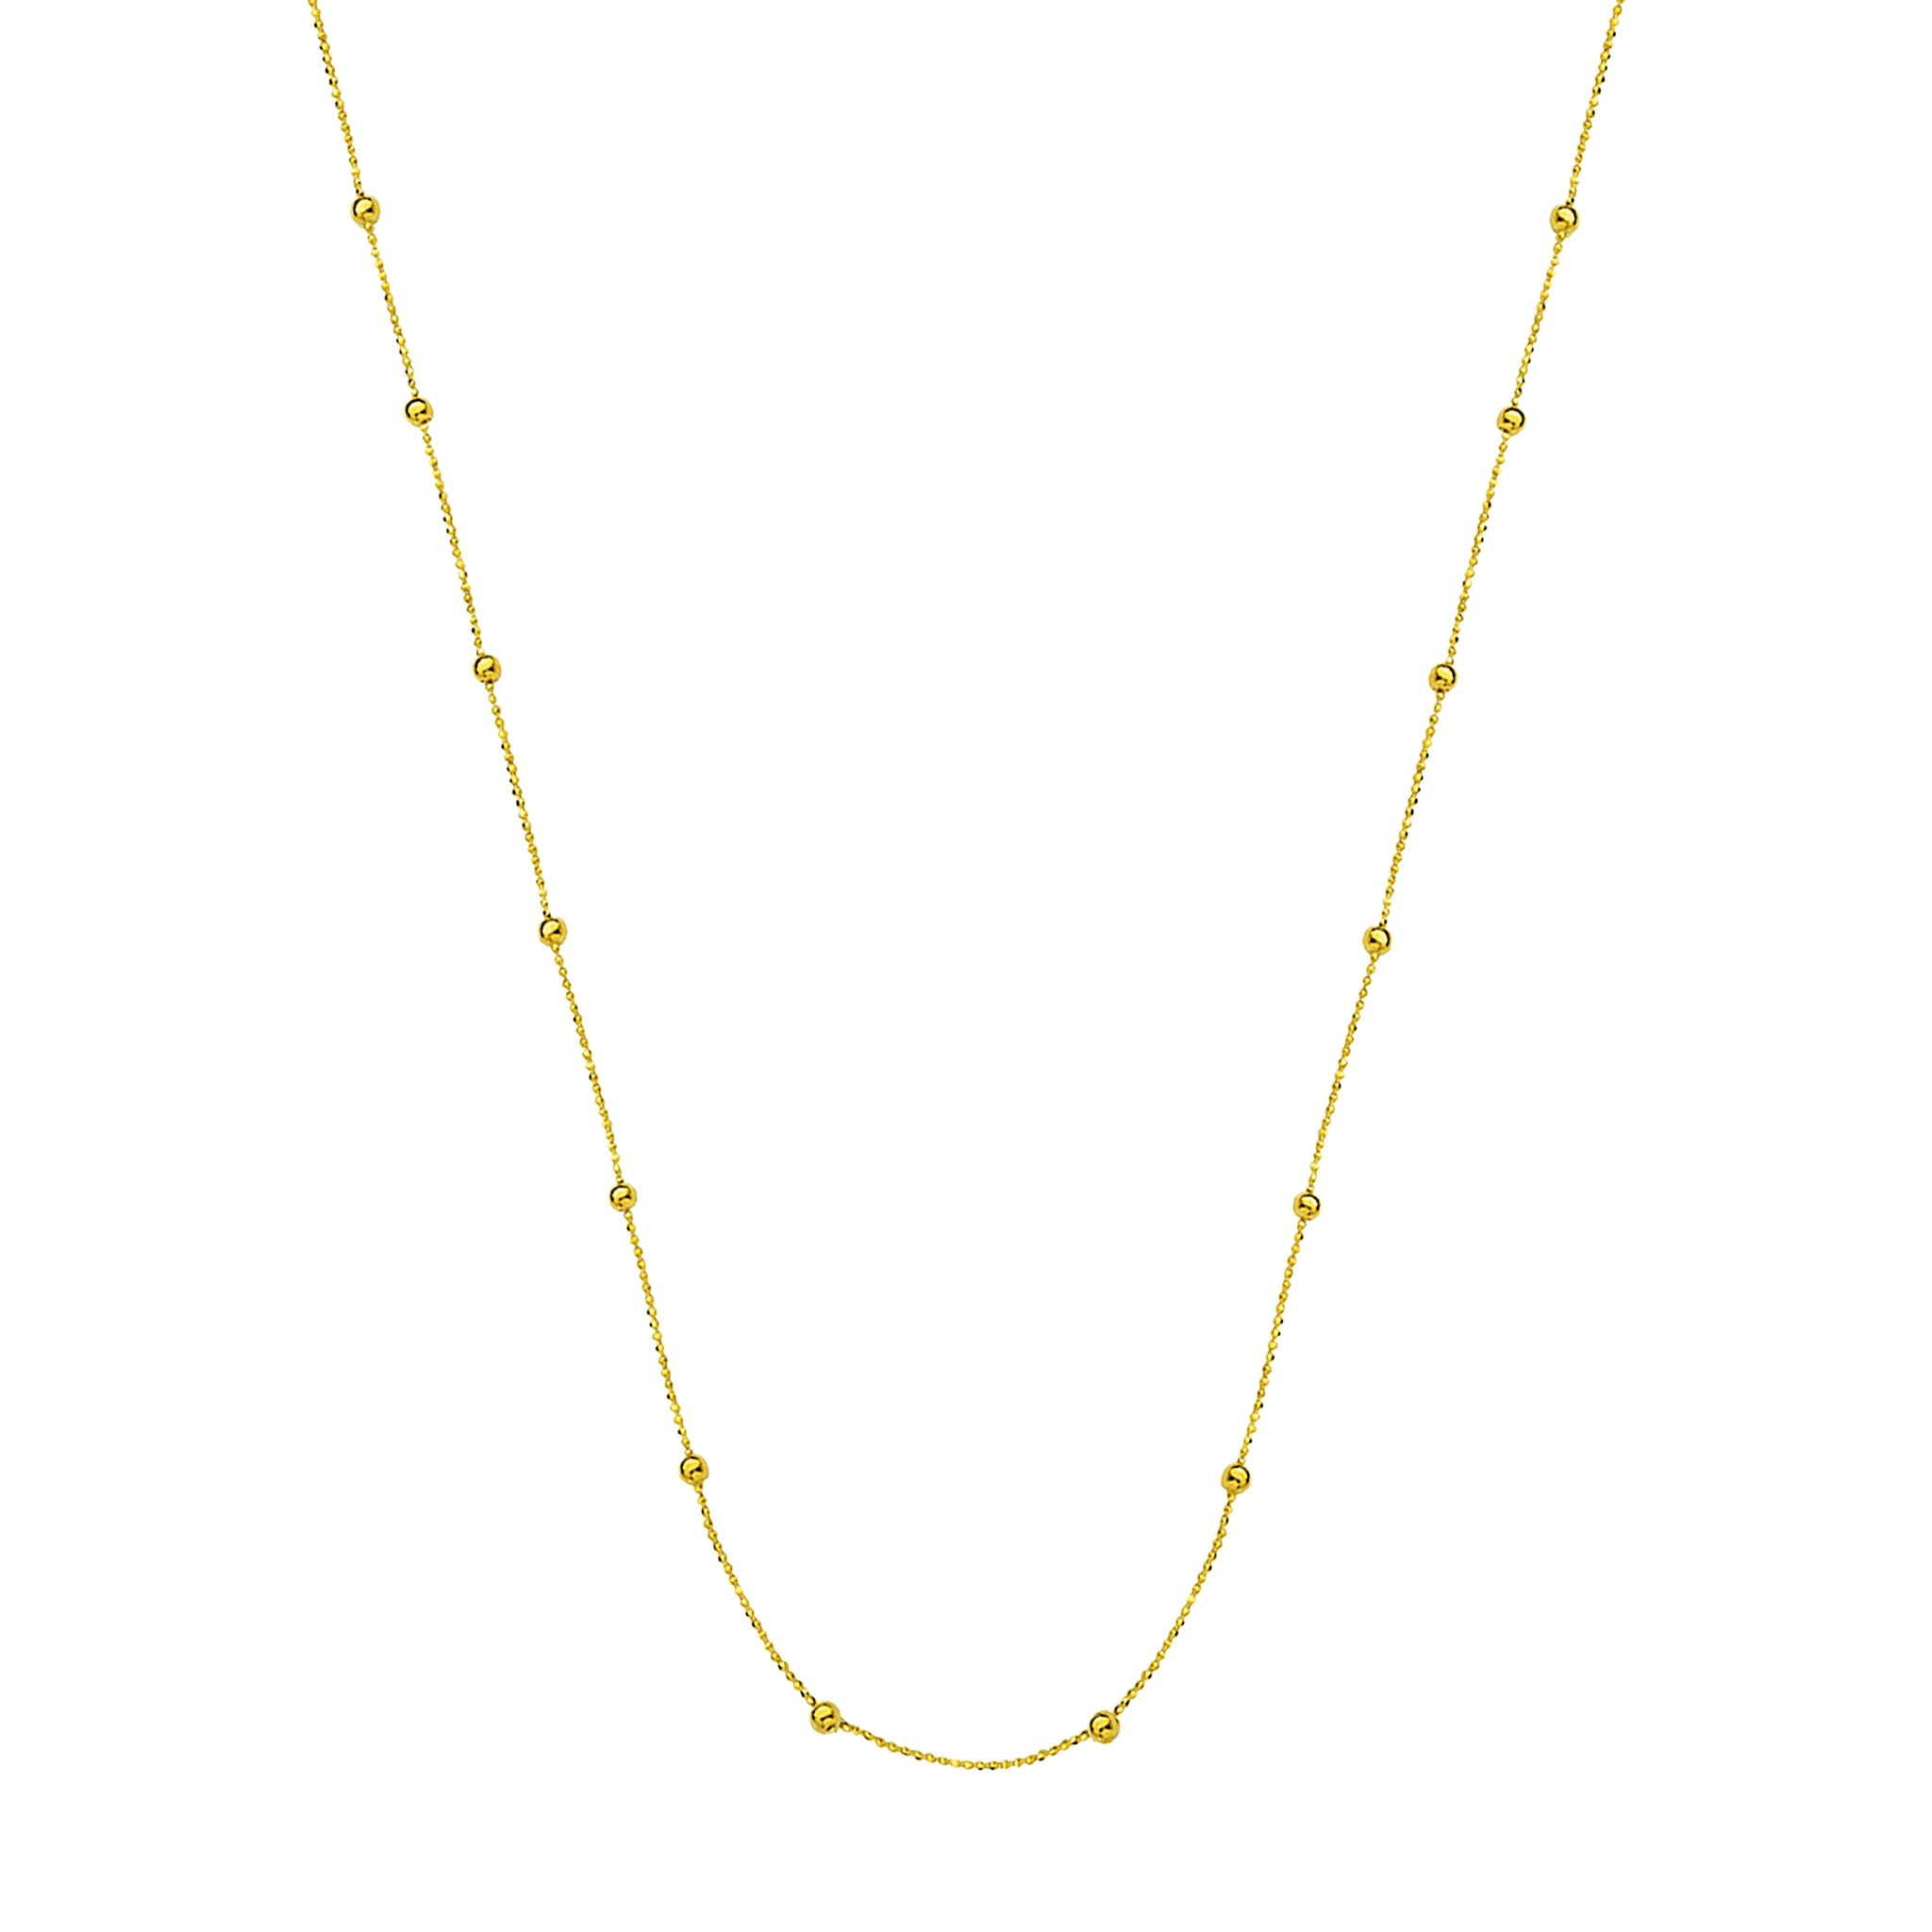 Hemsleys Collection 14K Micro Beads-By-The-Yard Necklace